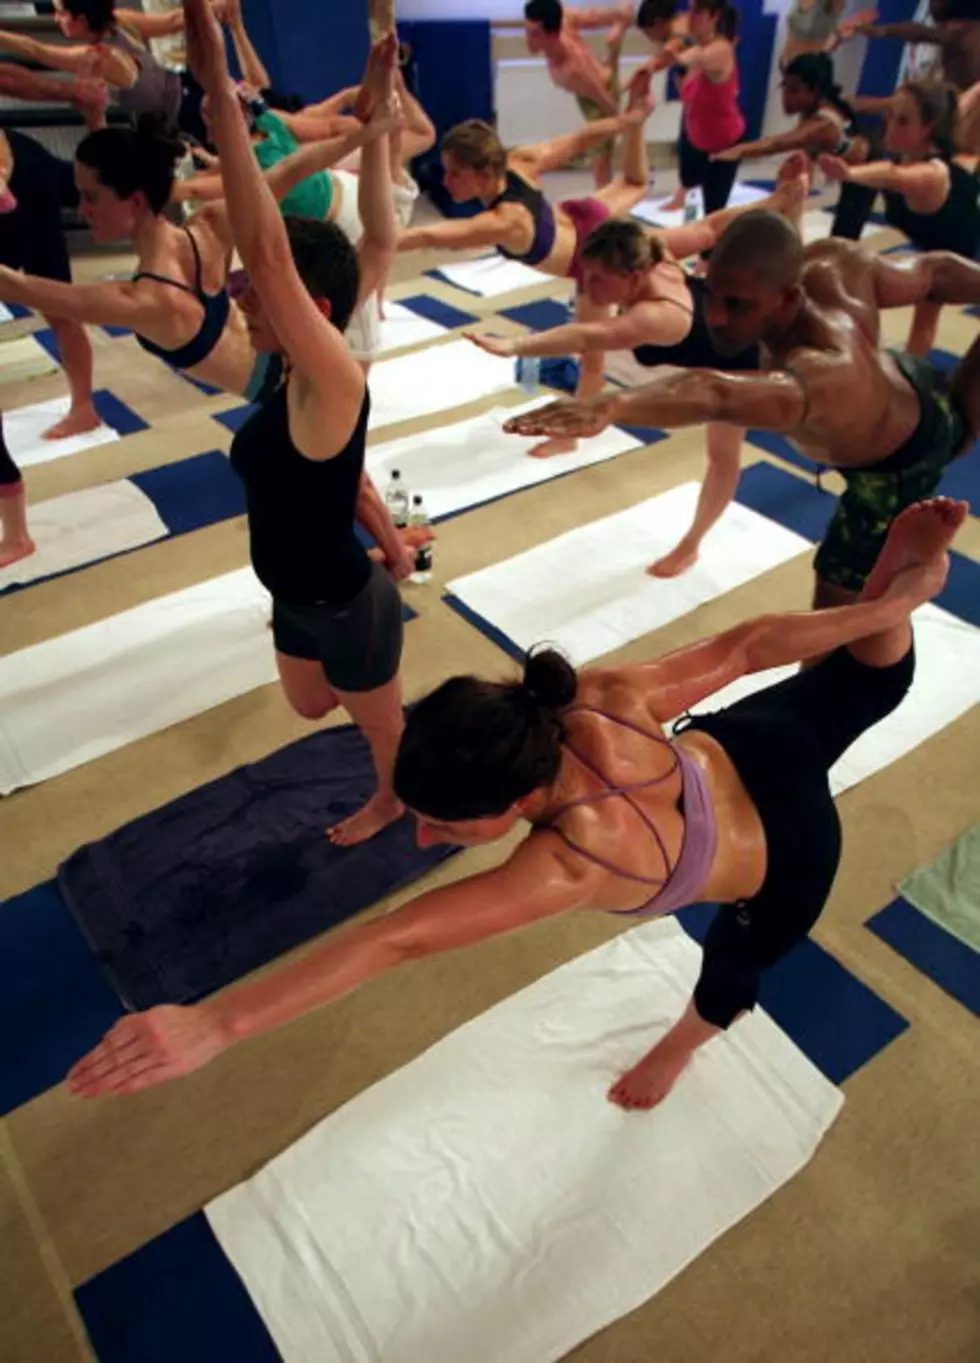 Judge Rules Yoga is Fit for Public Schools